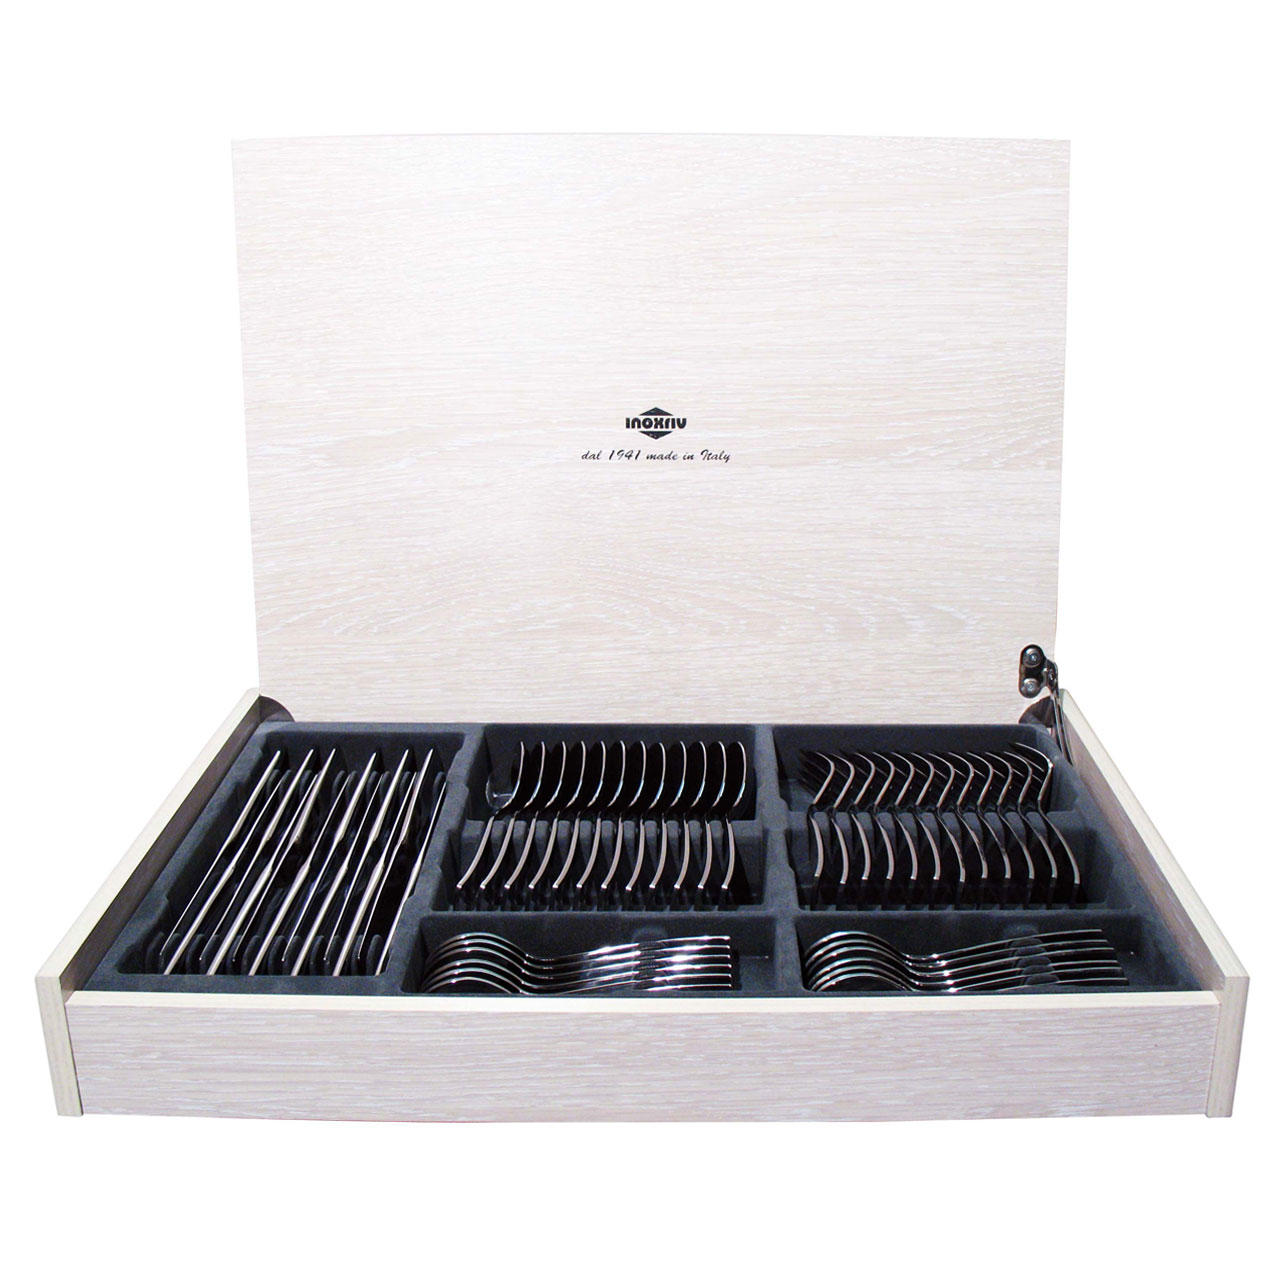 66401072 72 pcs. cutlery set 18/10 stainless steel Special Luxury Case 